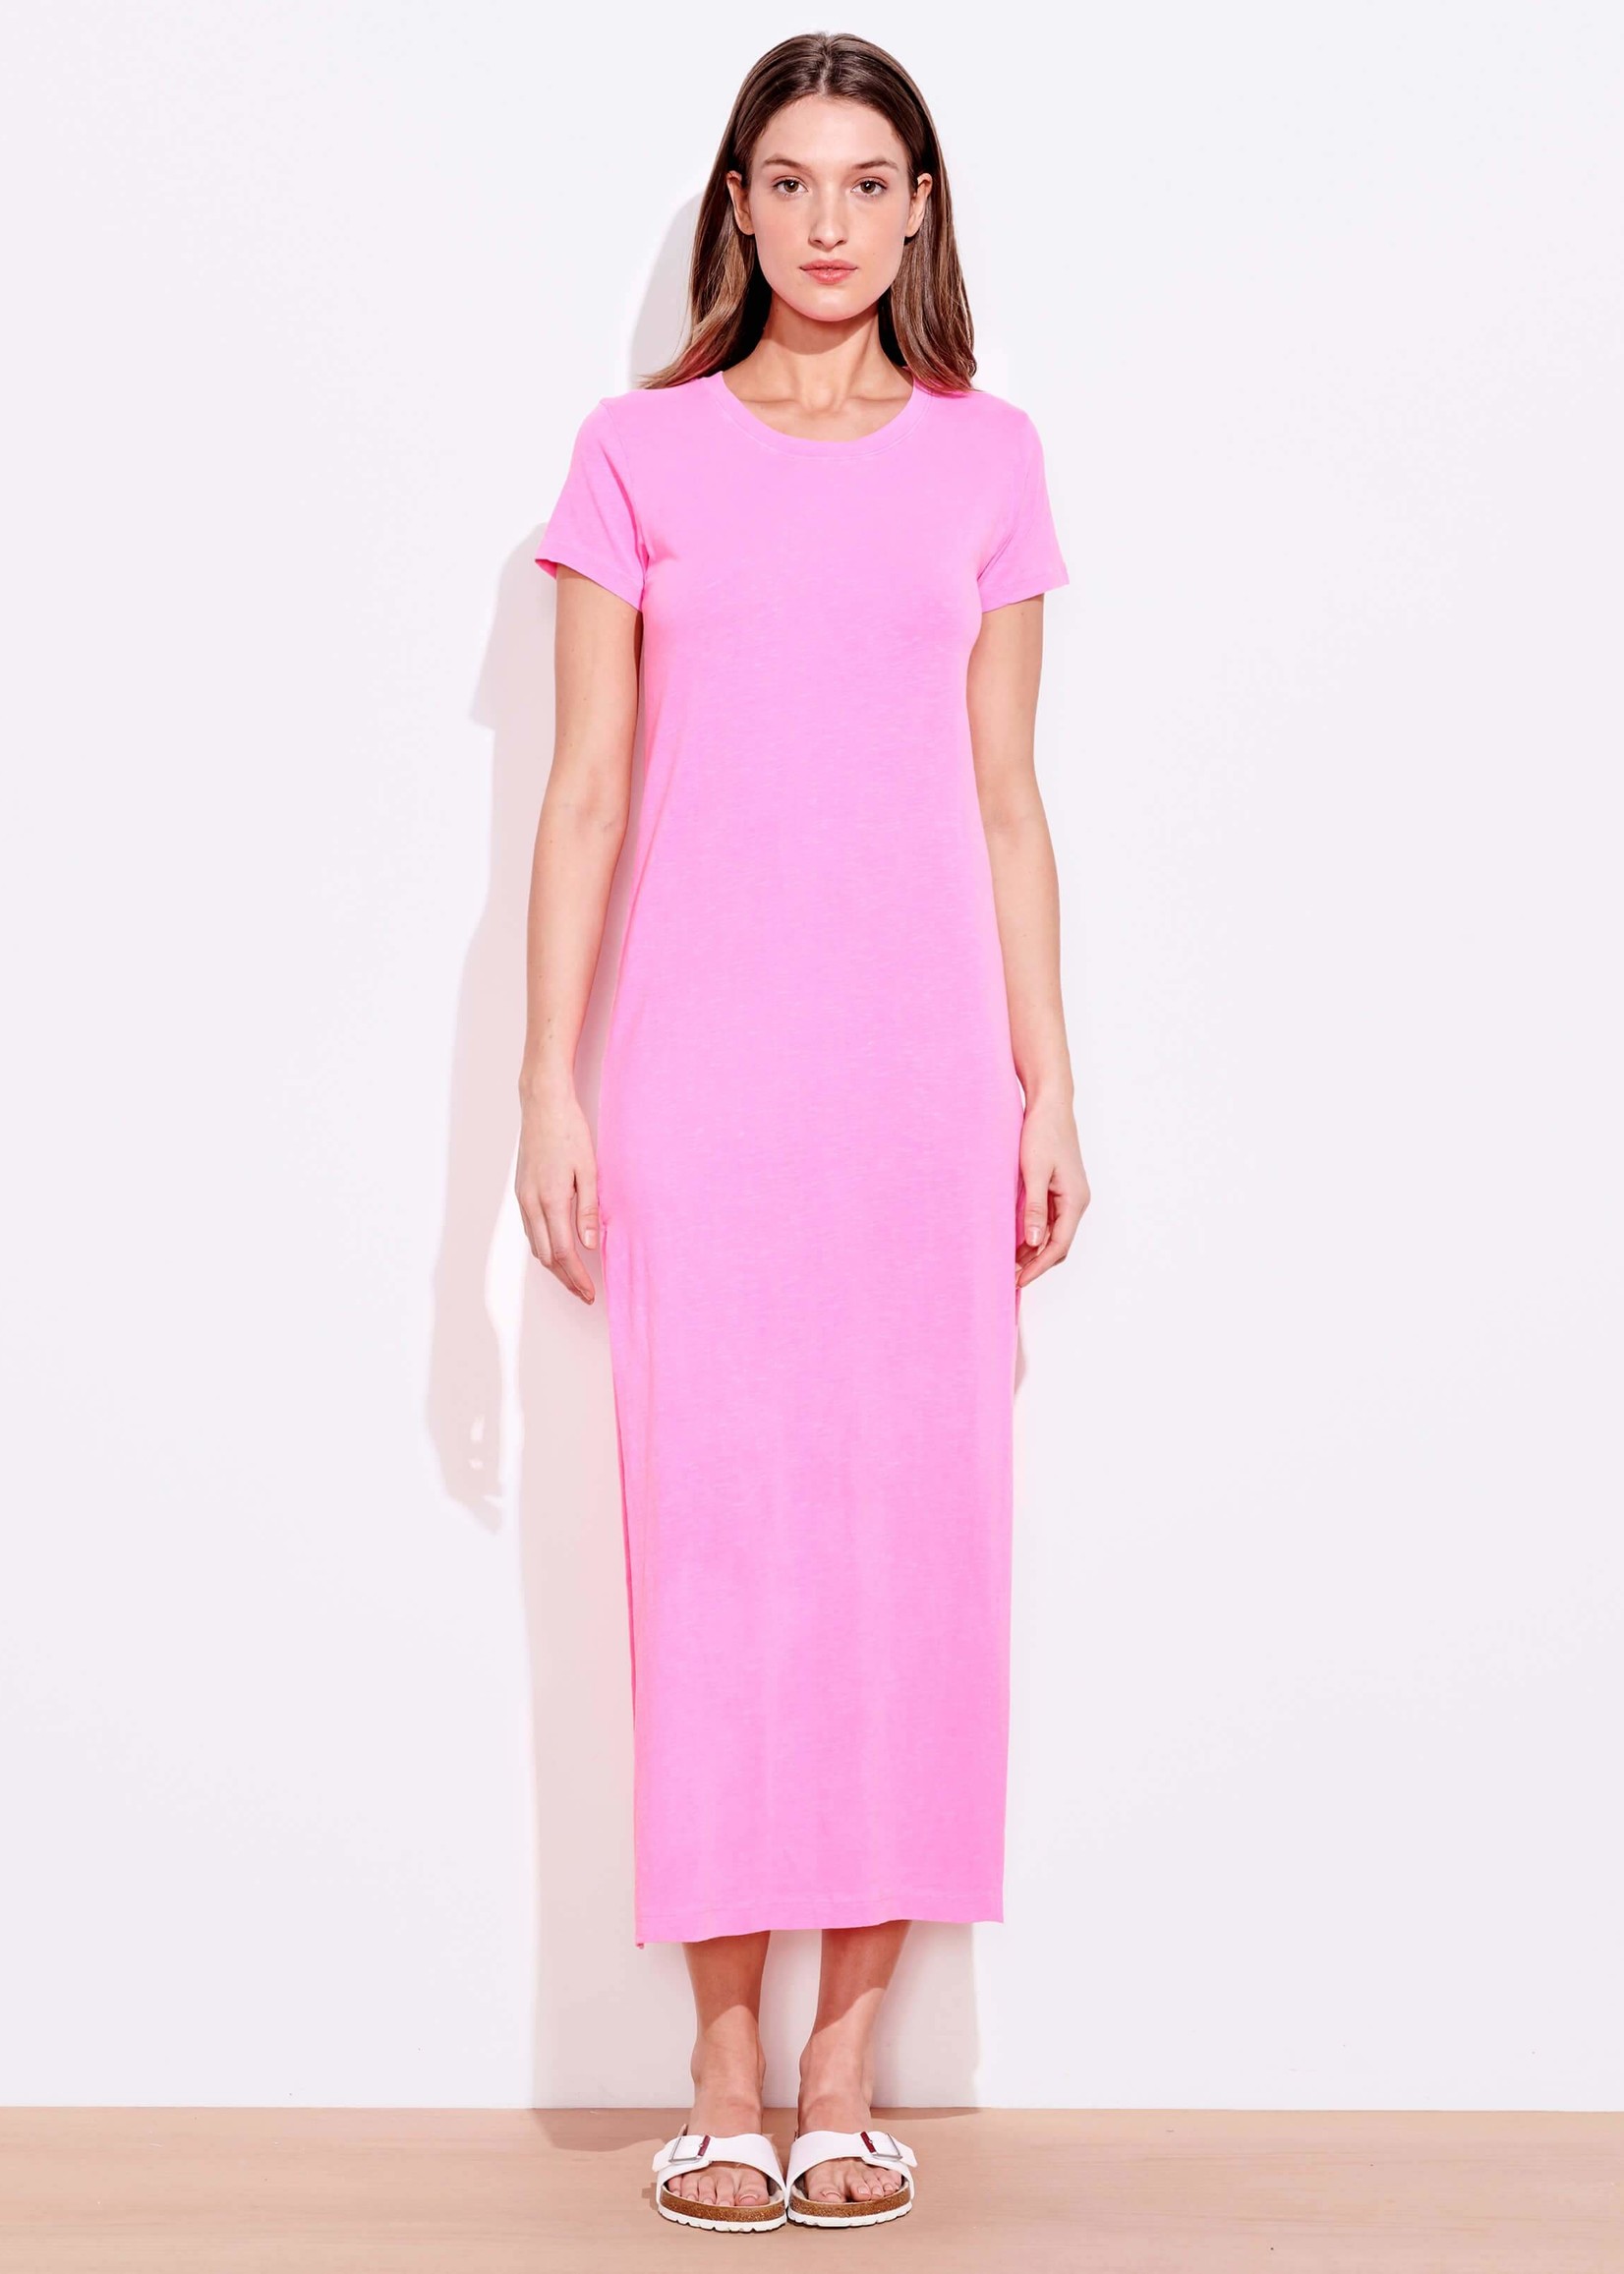 SUNDRY MAXI W/ SLIT IN NEON PINK